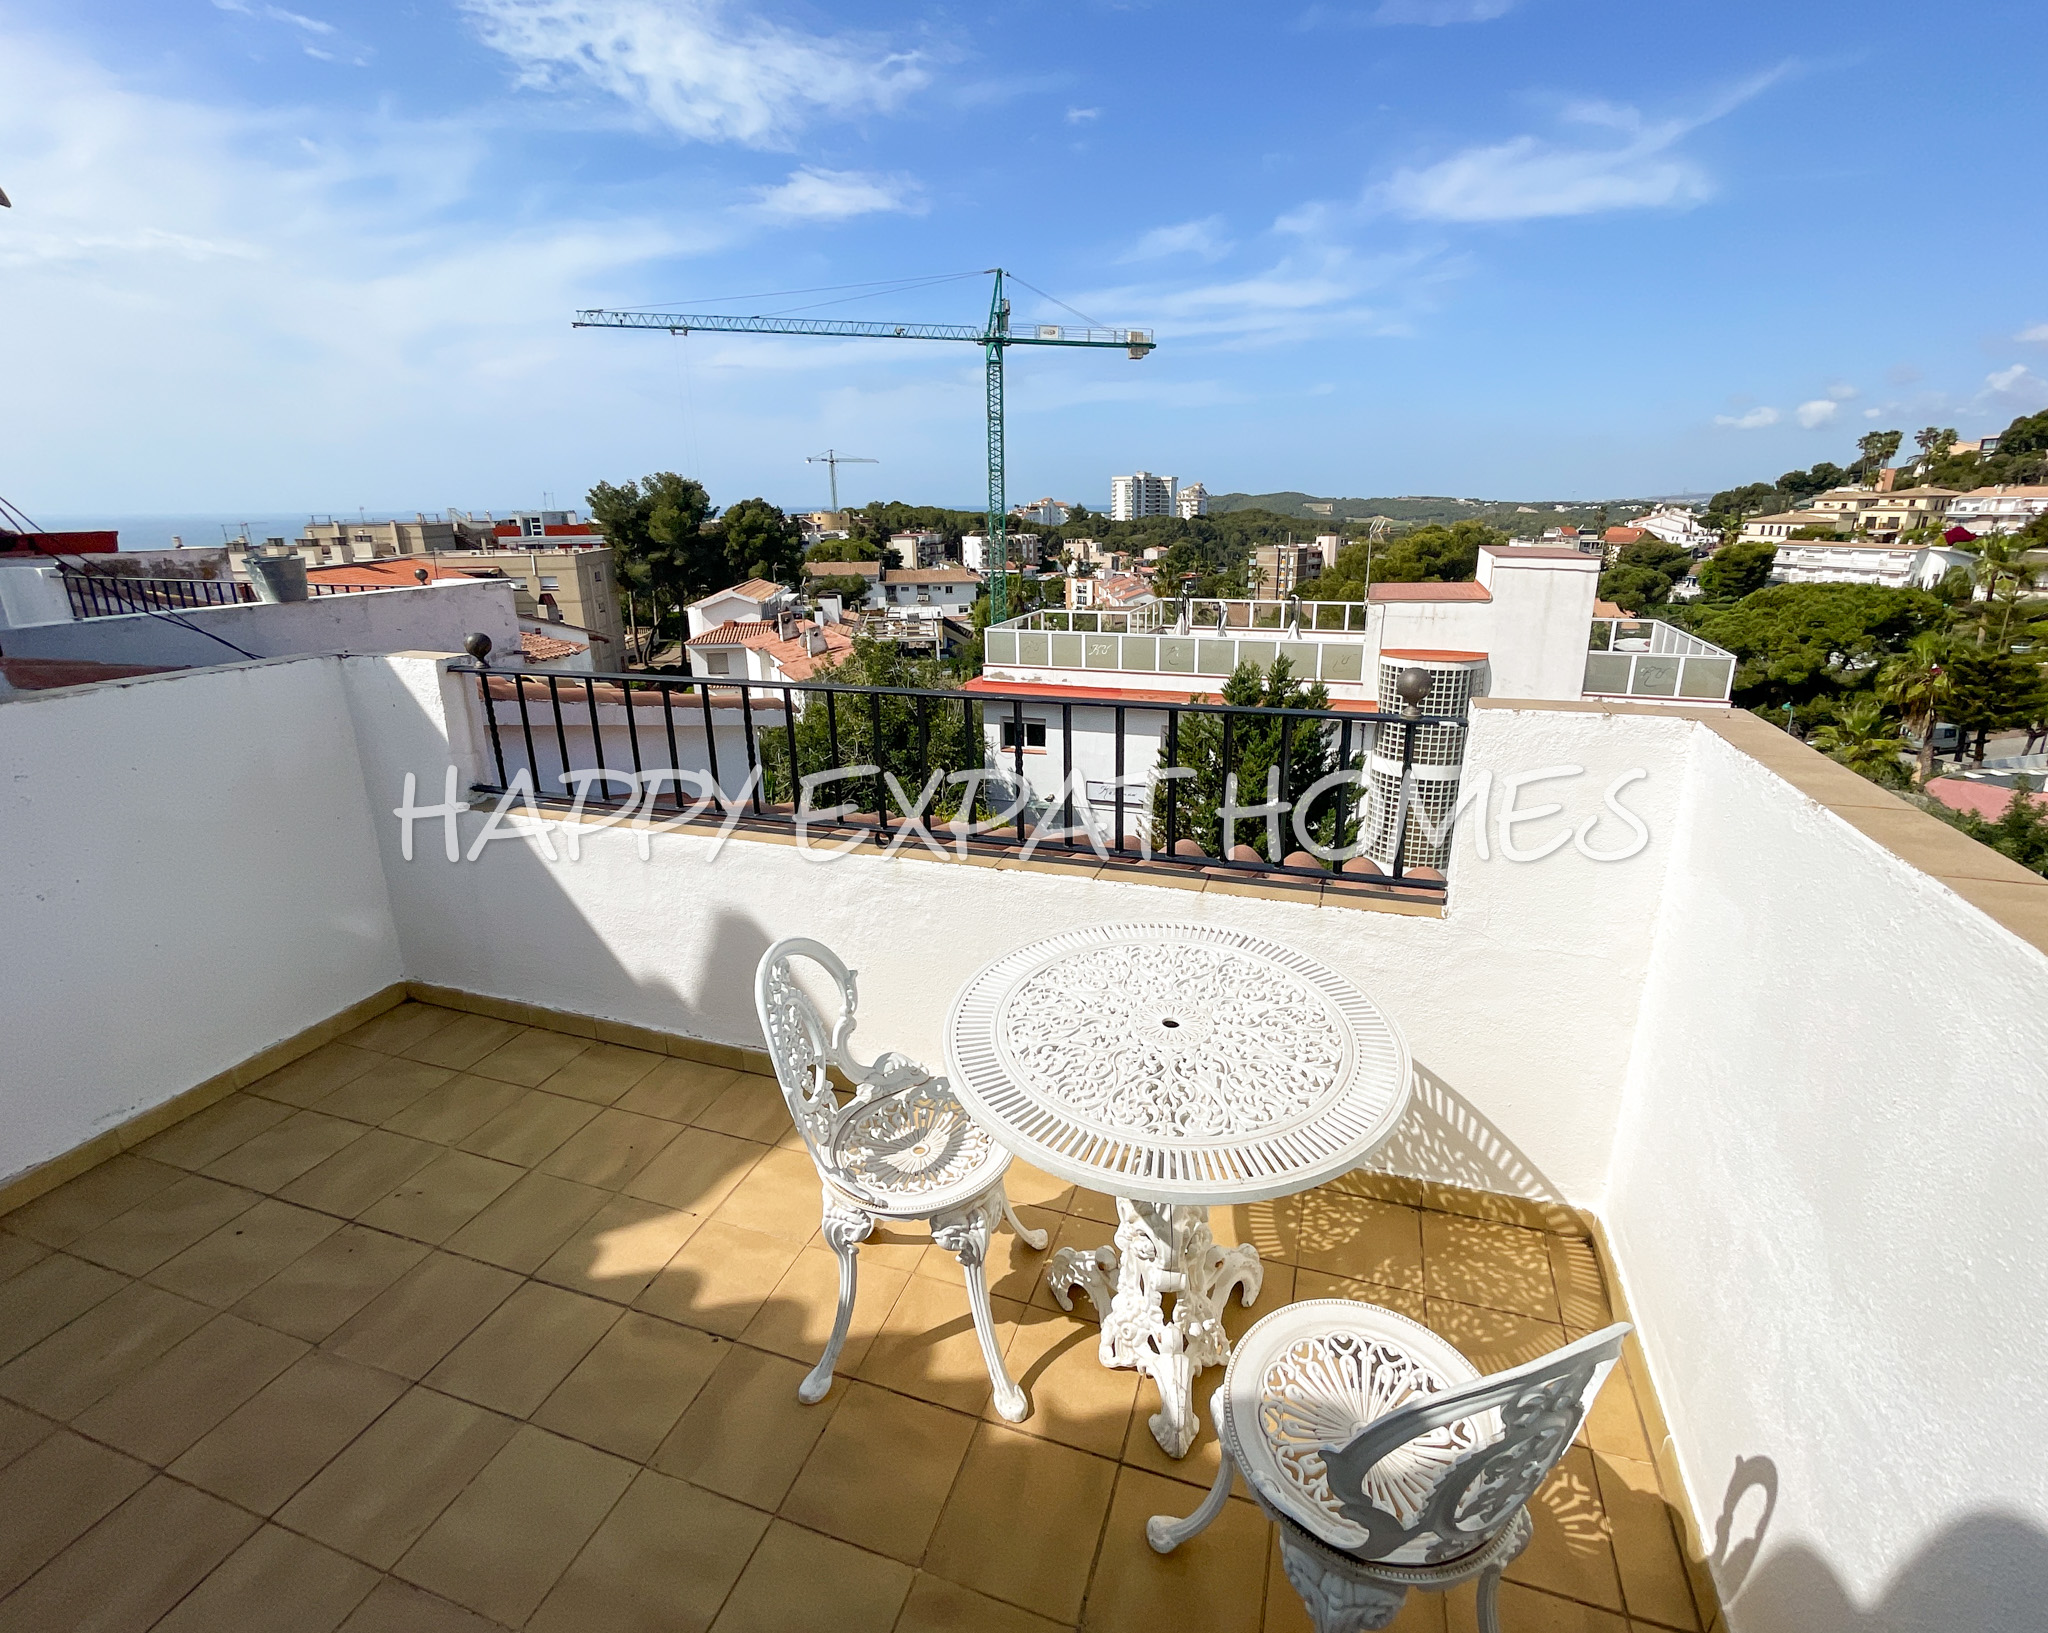 Big and furnished semi-detached house close to Sitges